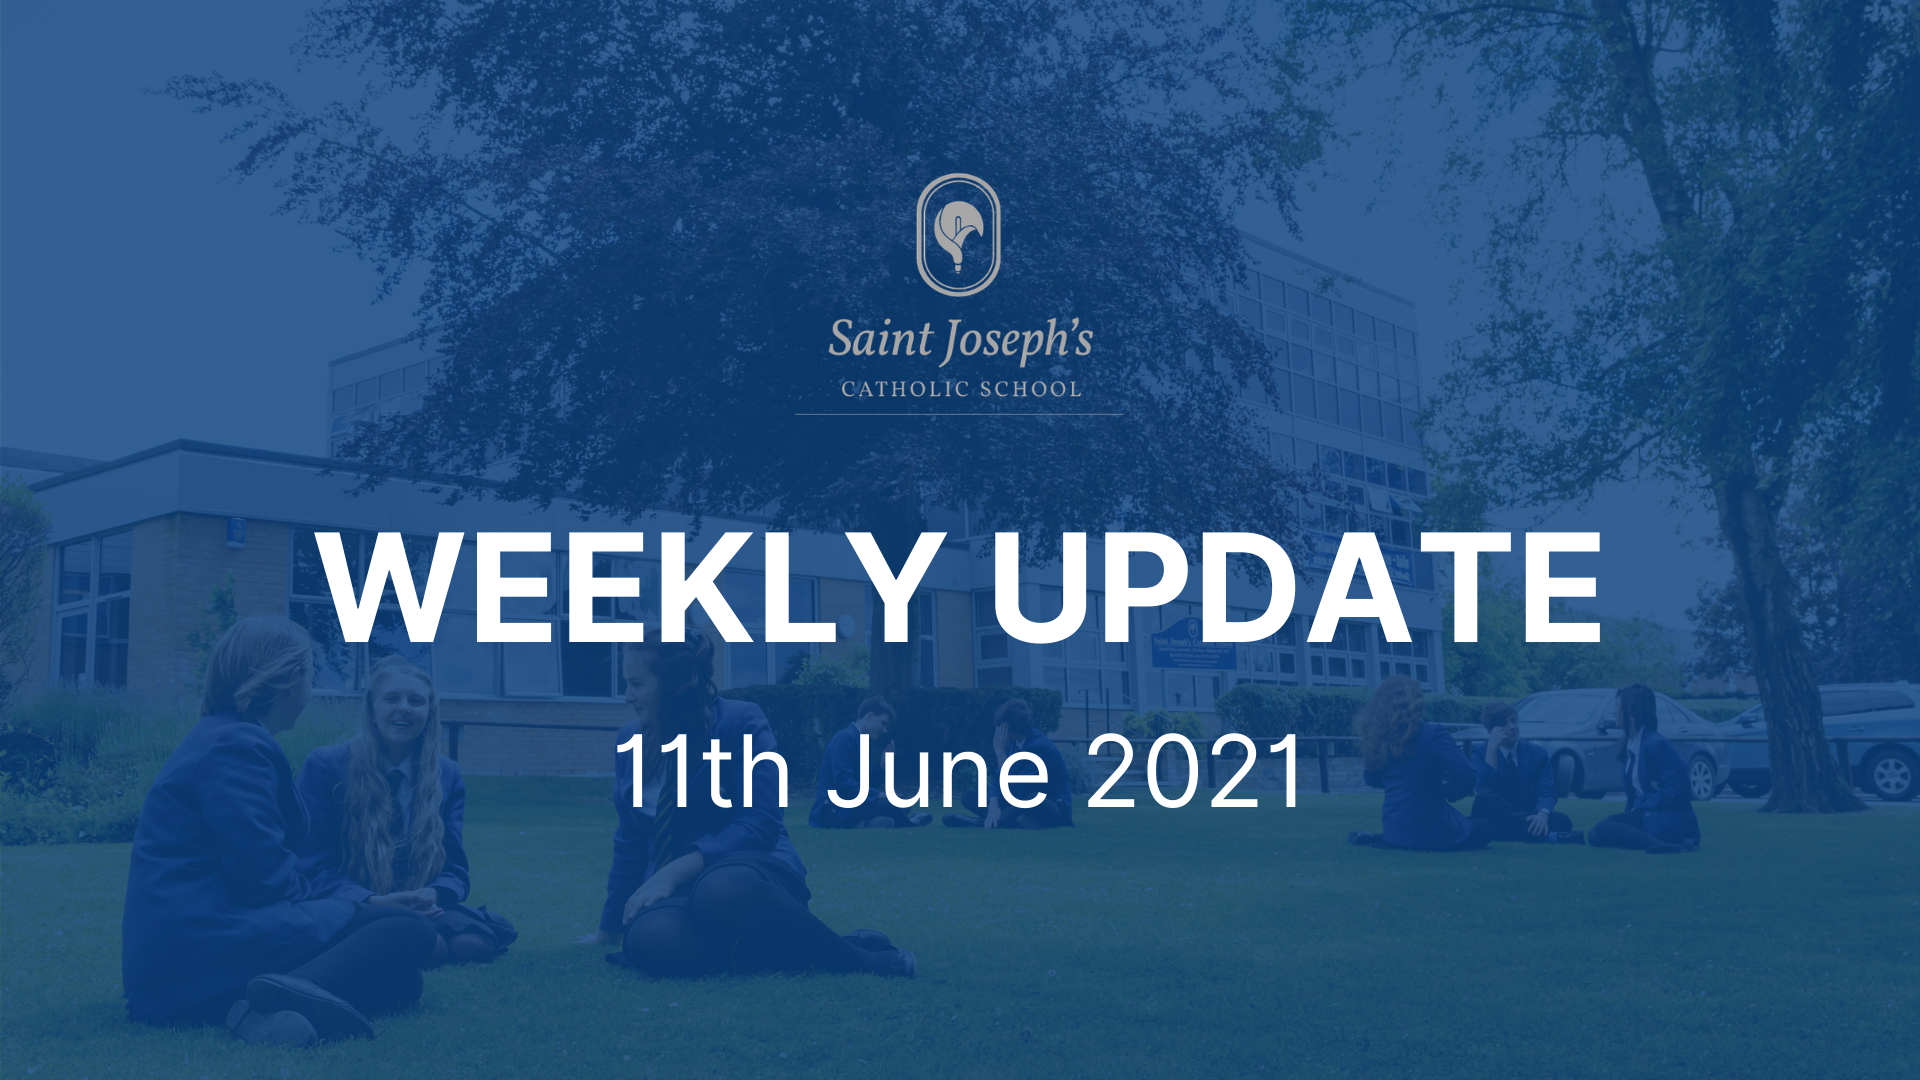 Featured image for “Weekly Update: 11th June 2021”